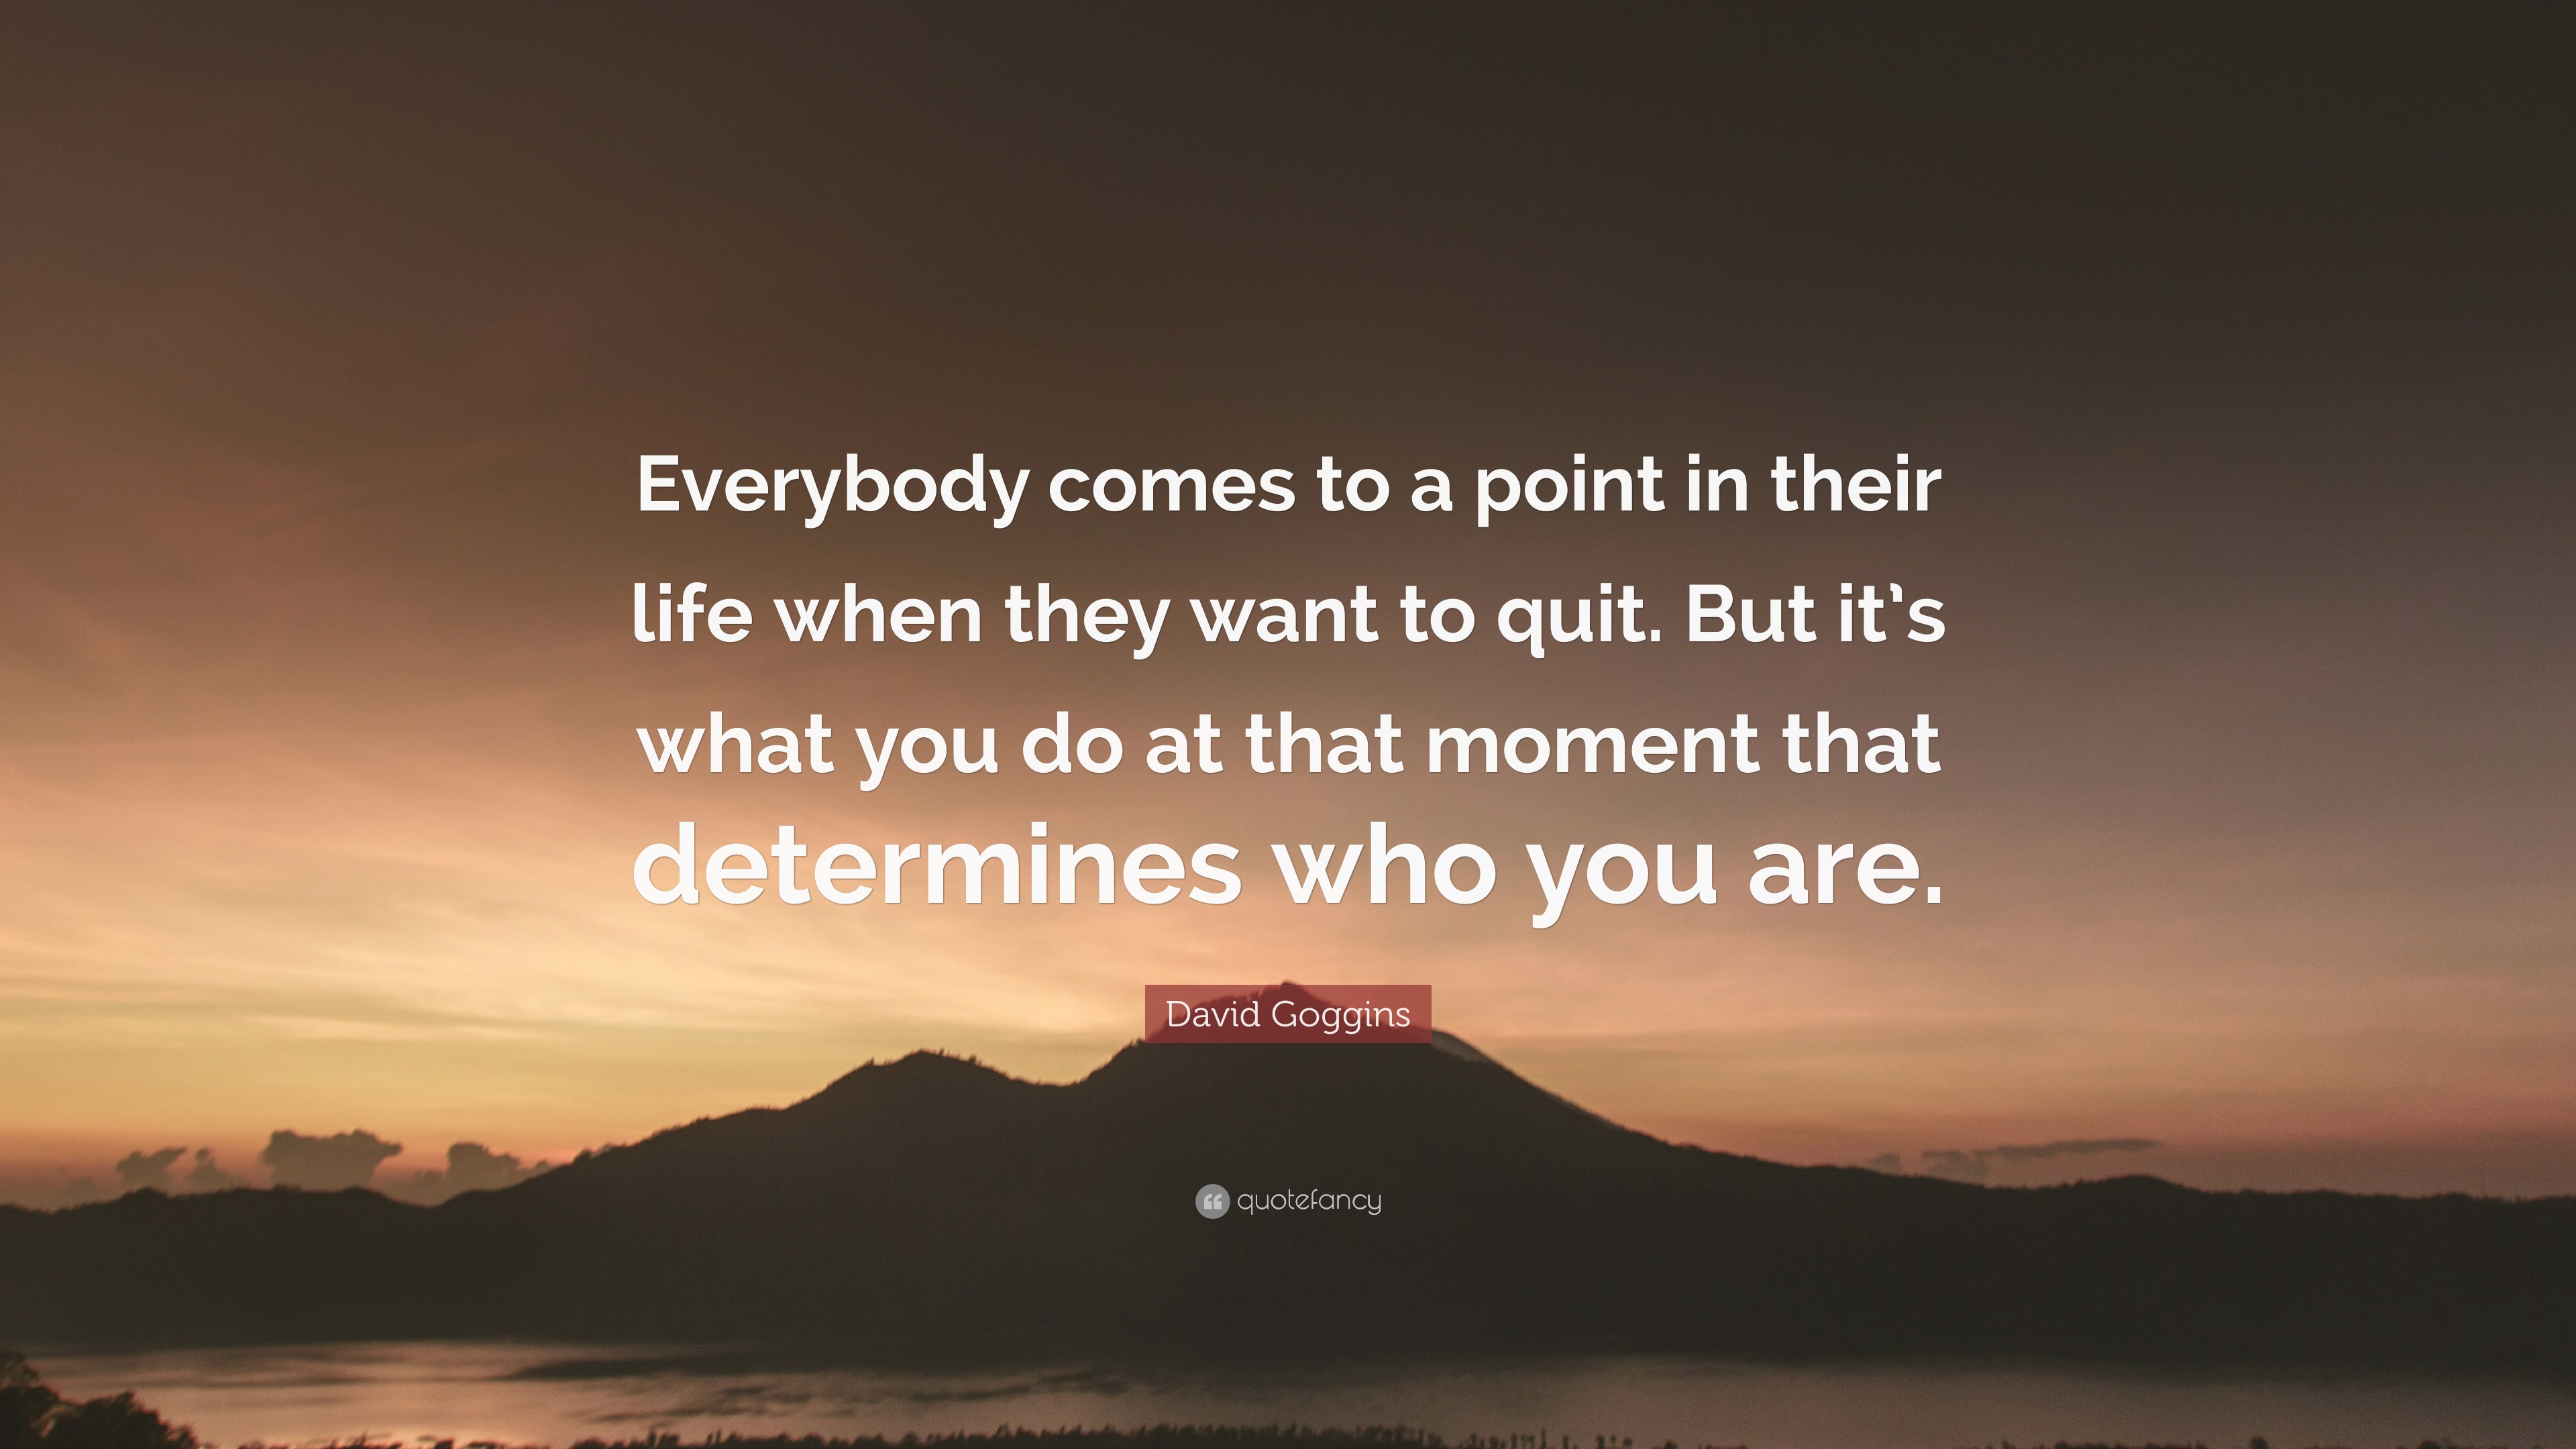 David Goggins Quote: “Everybody comes to a point in their life when they  want to quit. But it's what you do at that moment that determines who...”